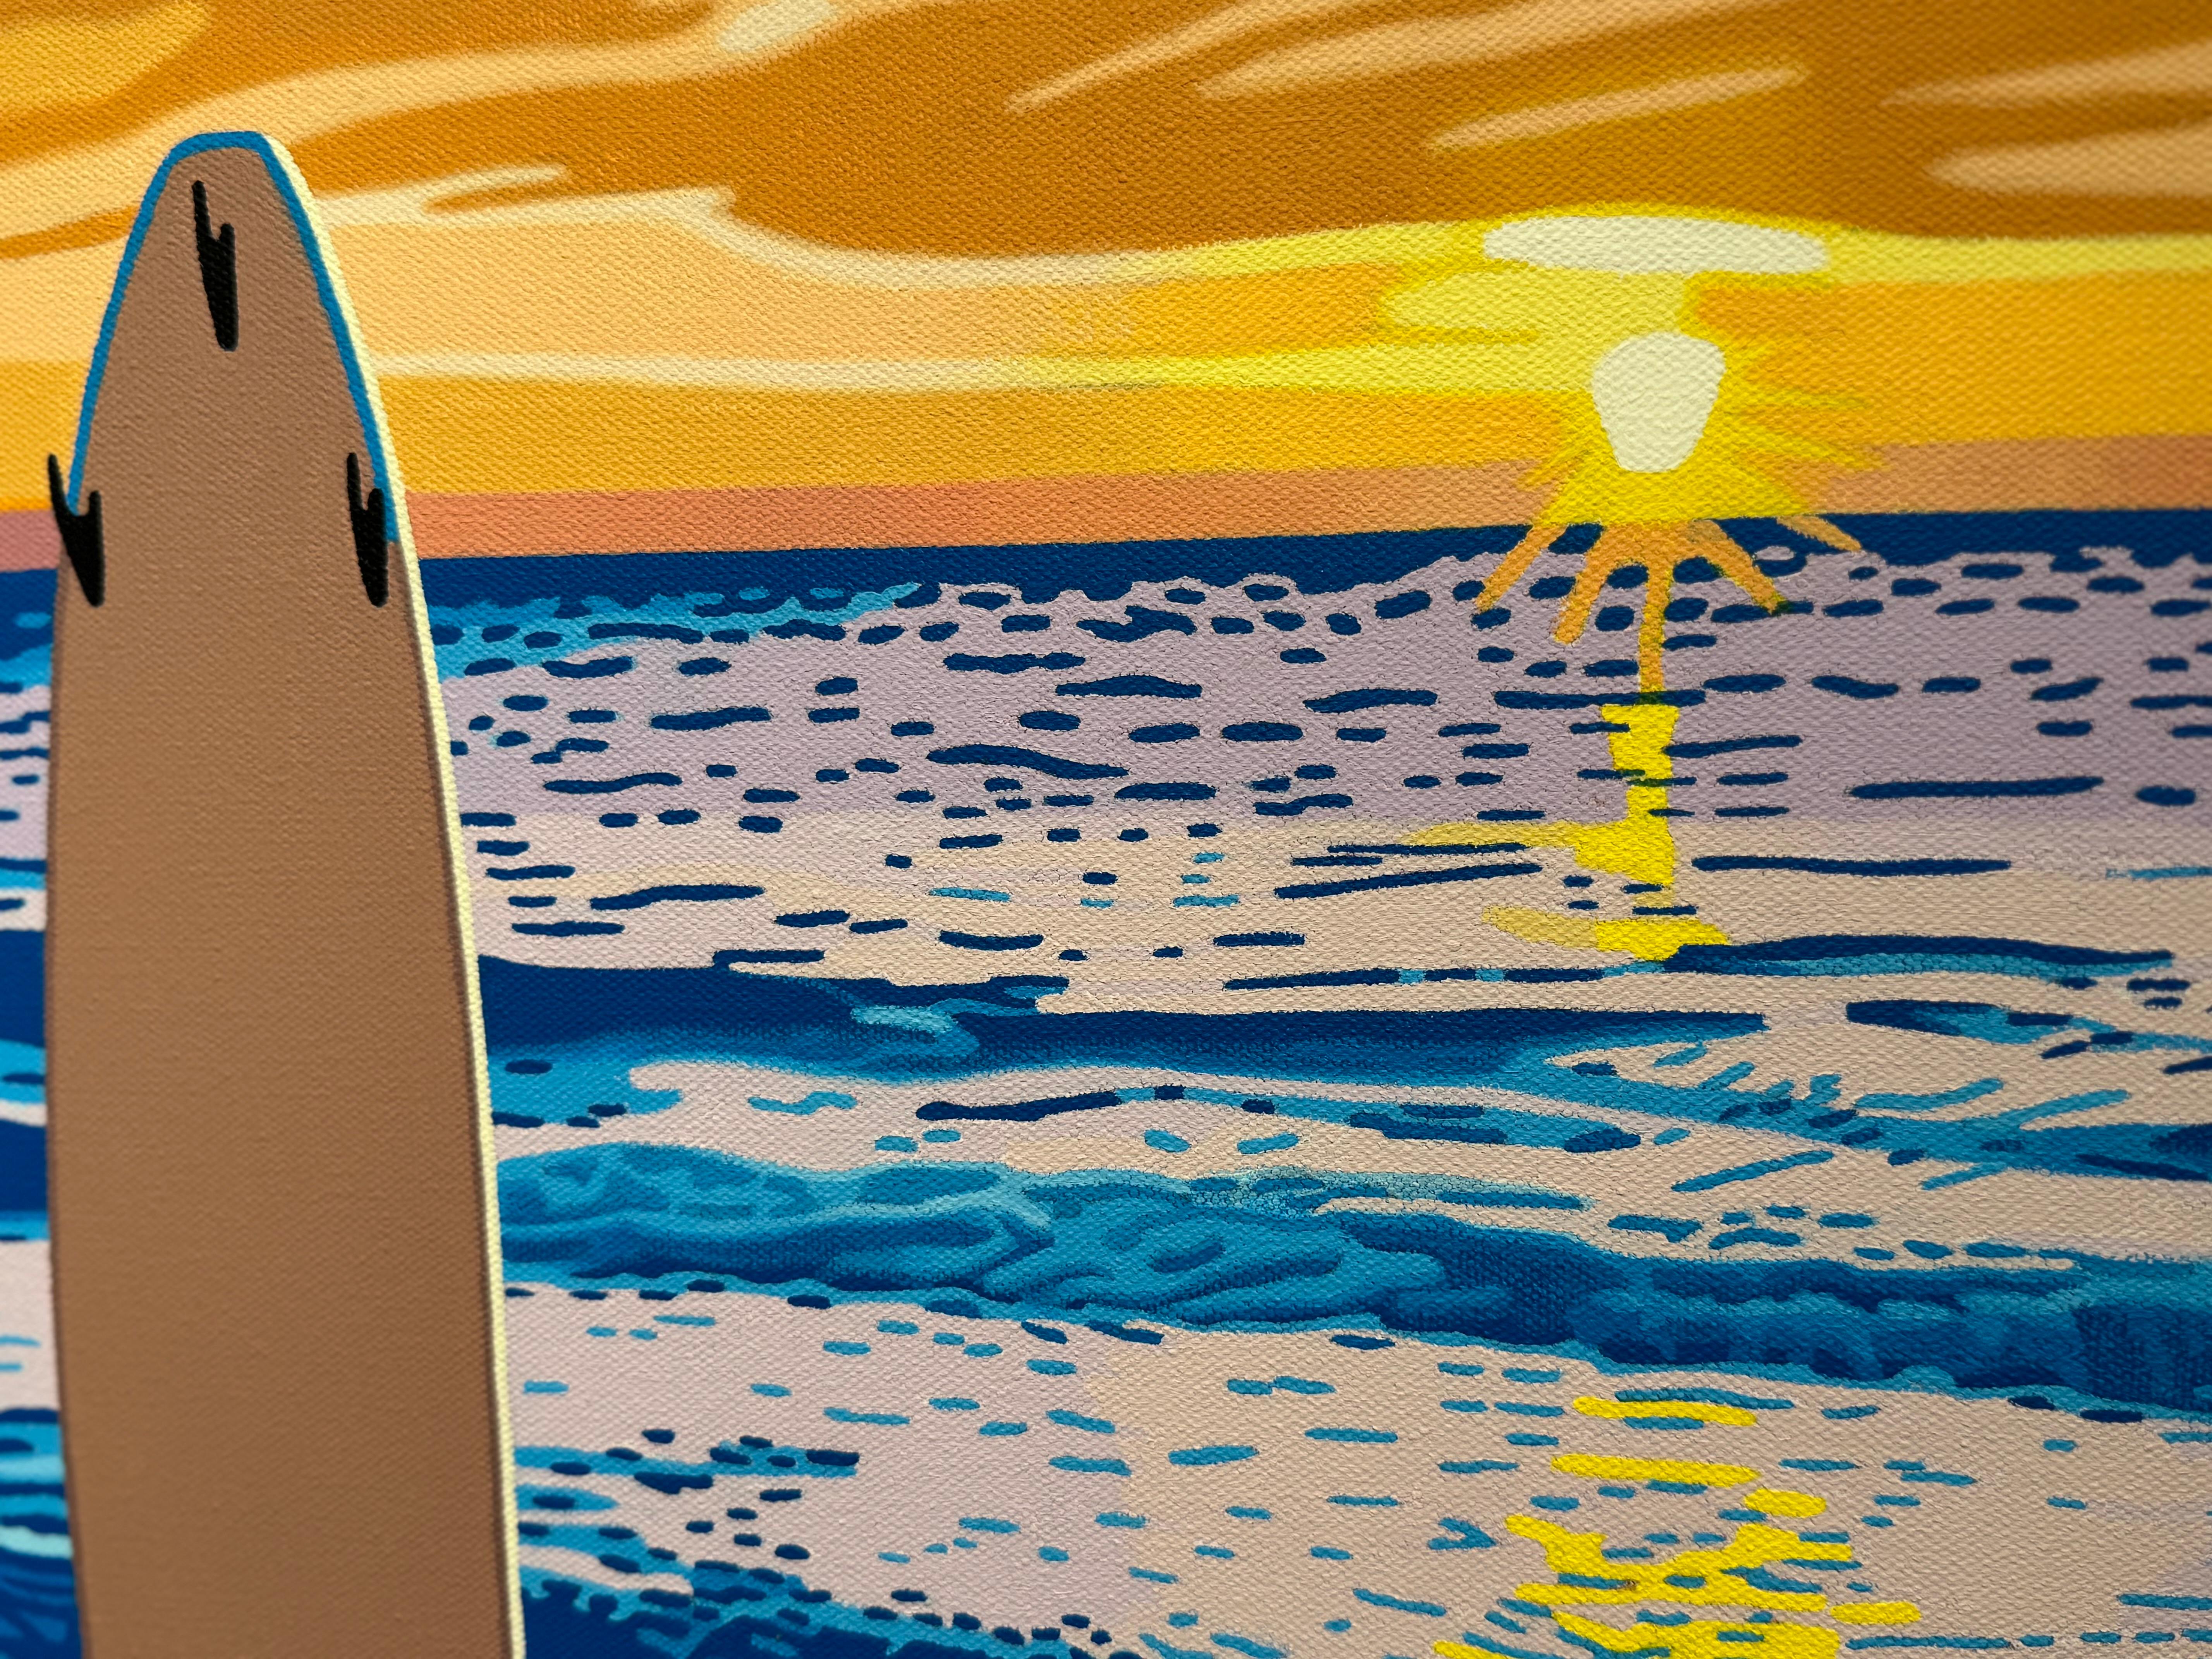 “Dawn Patrol” illustrative oil painting depicting surf boards and horizon For Sale 4